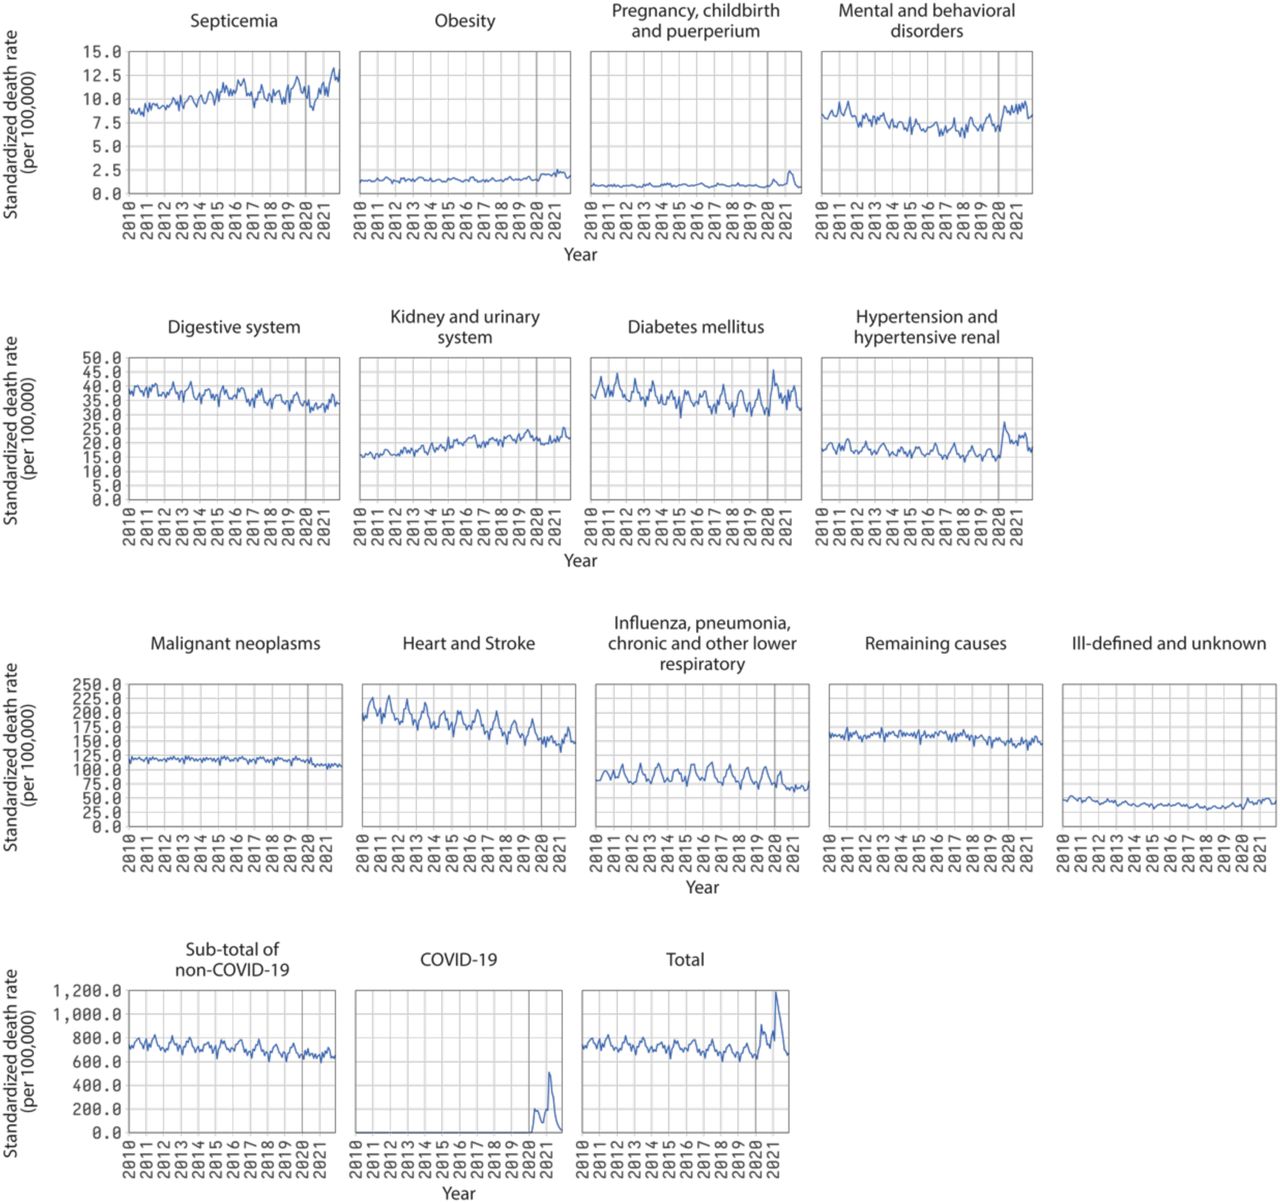 Excess maternal mortality in Brazil: Regional inequalities and trajectories  during the COVID-19 epidemic